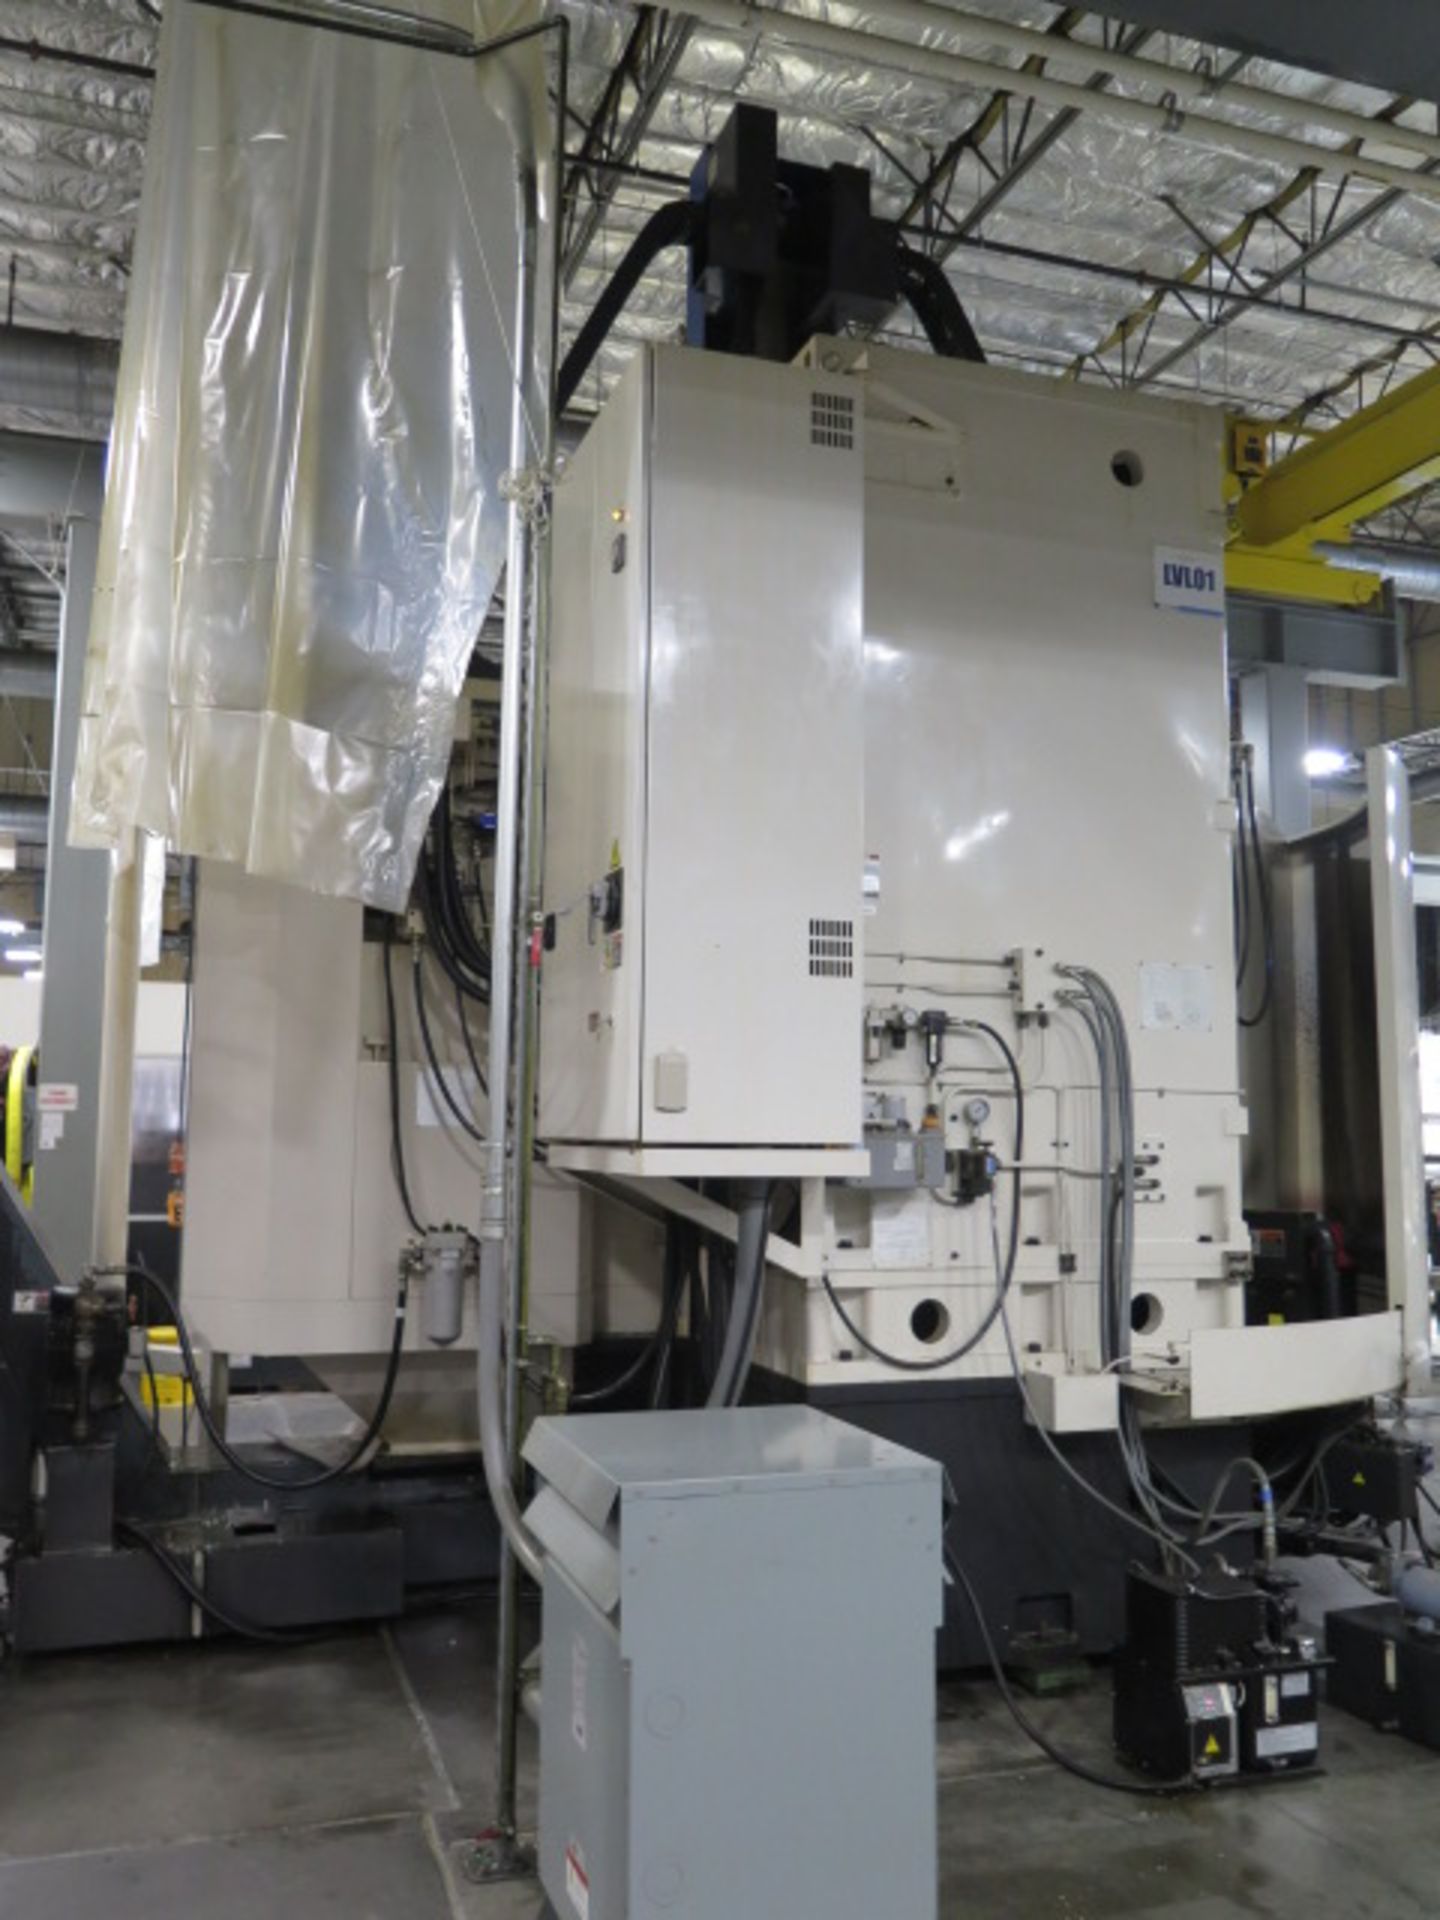 2012 Toshiba TUE-200 (S) Live Spindle CNC Vertical Boring Machine s/n 162426 w/ Fanuc Series 0i-TD - Image 7 of 24